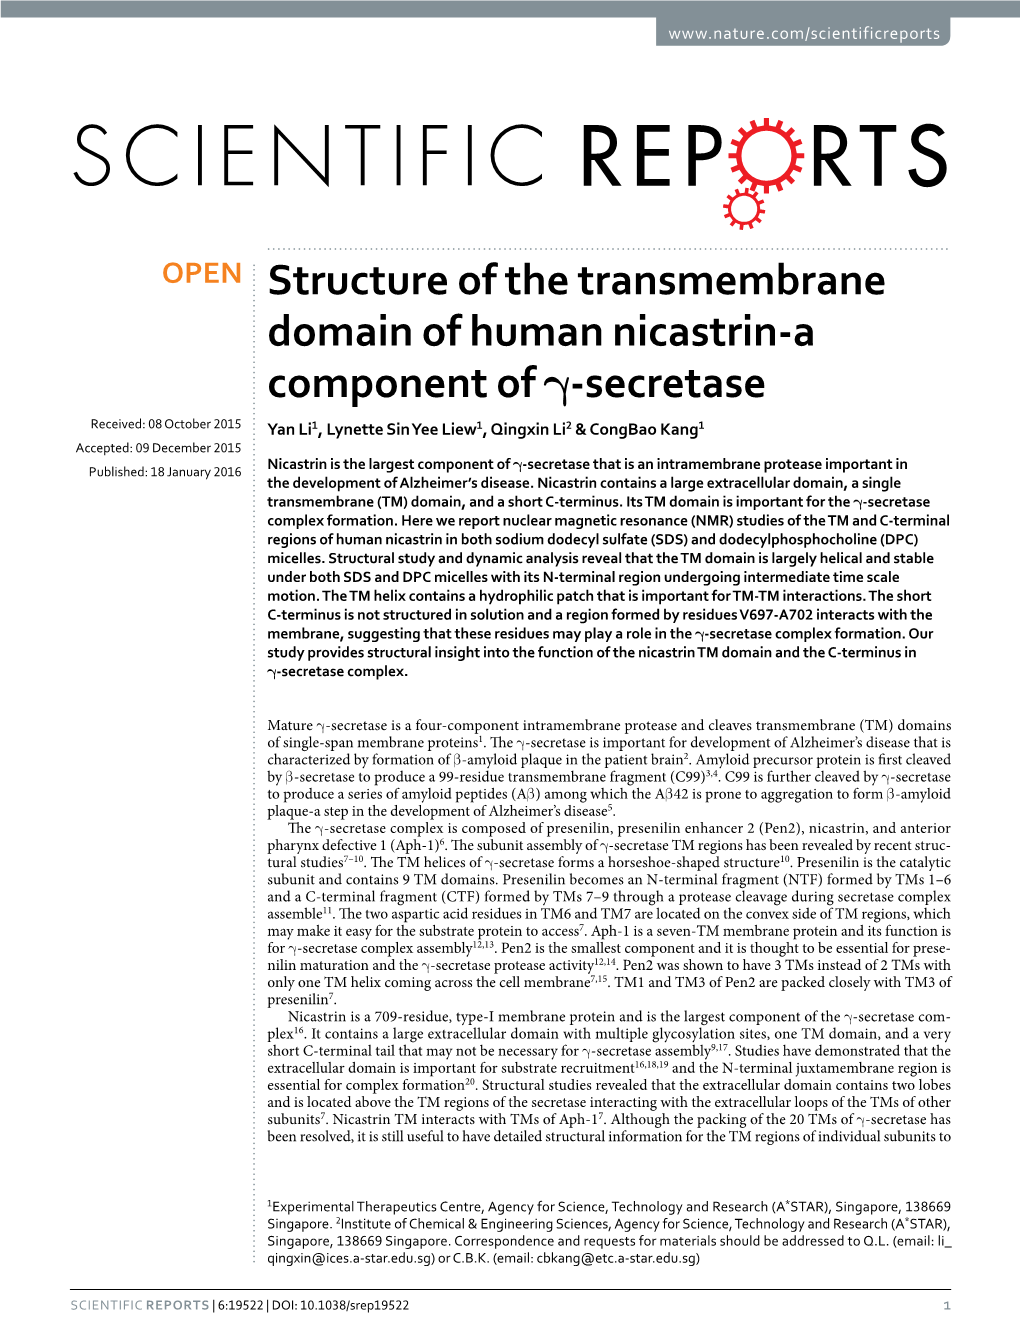 Structure of the Transmembrane Domain of Human Nicastrin-A